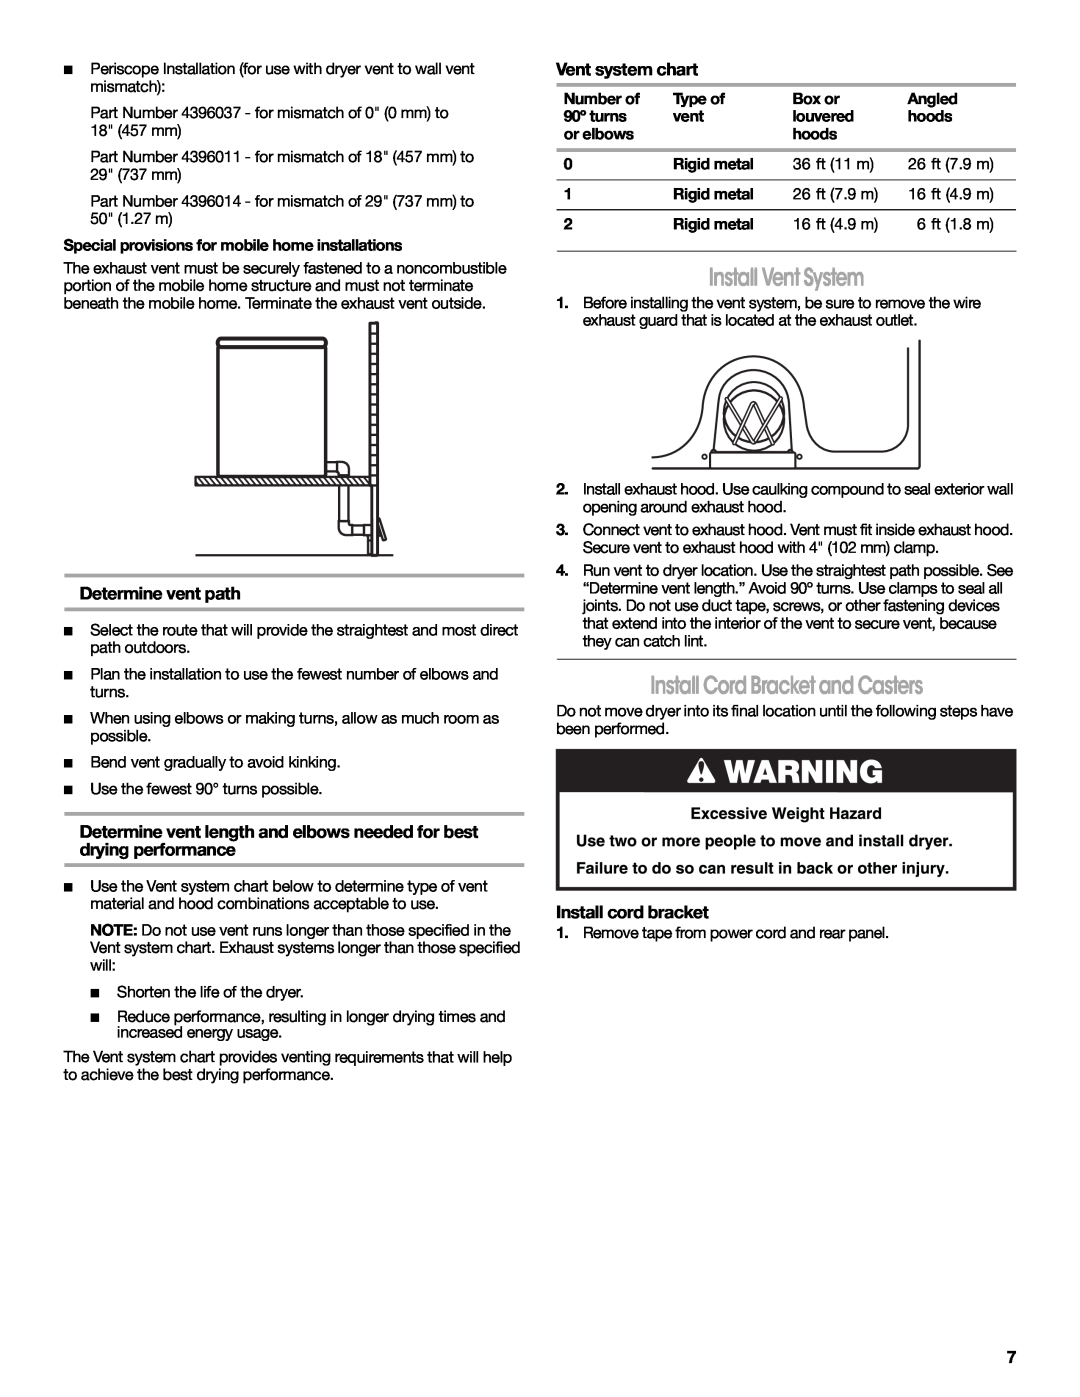 Crosley W10151585B manual Install Vent System, Install Cord Bracket and Casters, Determine vent path, Vent system chart 